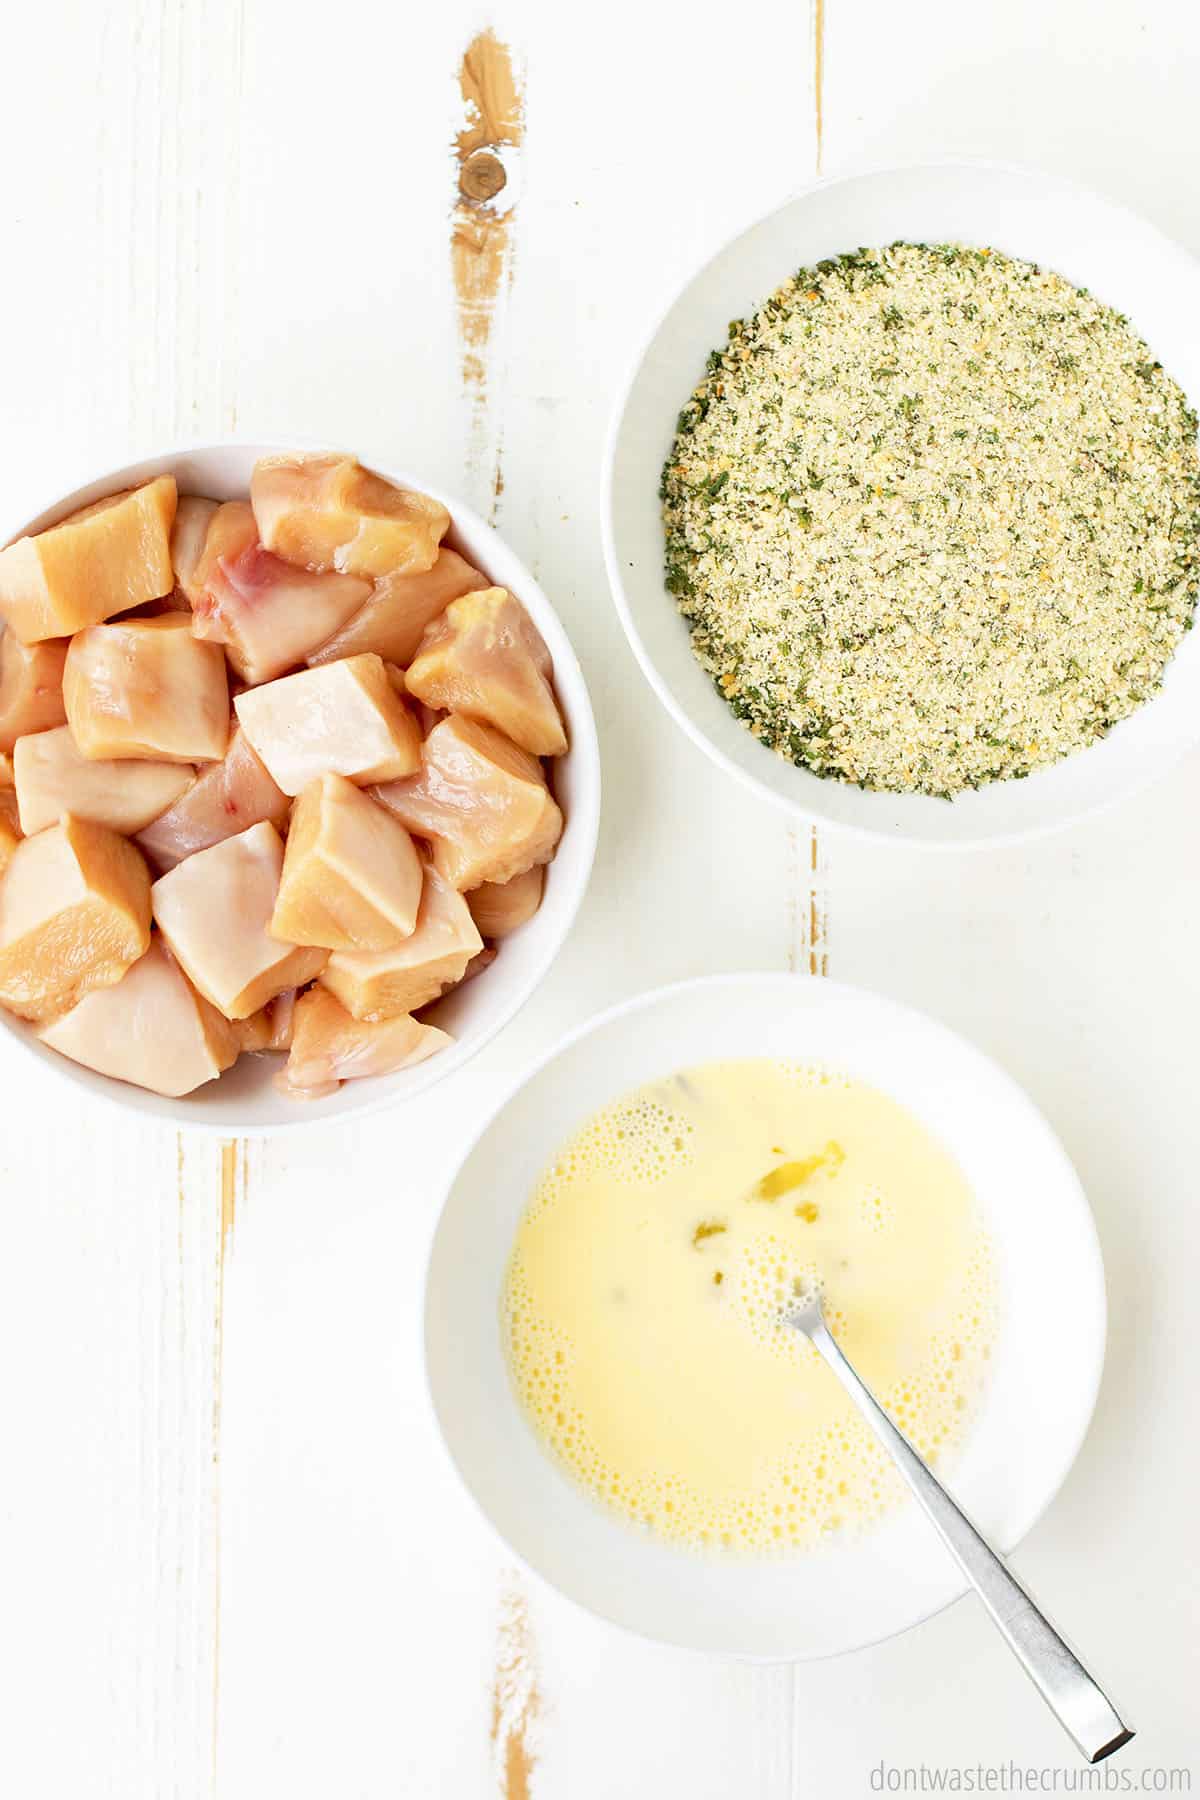 Cubed, 1 inch pieces of raw chicken fill one bowl; a second bowl is filled with whipped eggs, and a third bowl is filled with flour and seasonings.